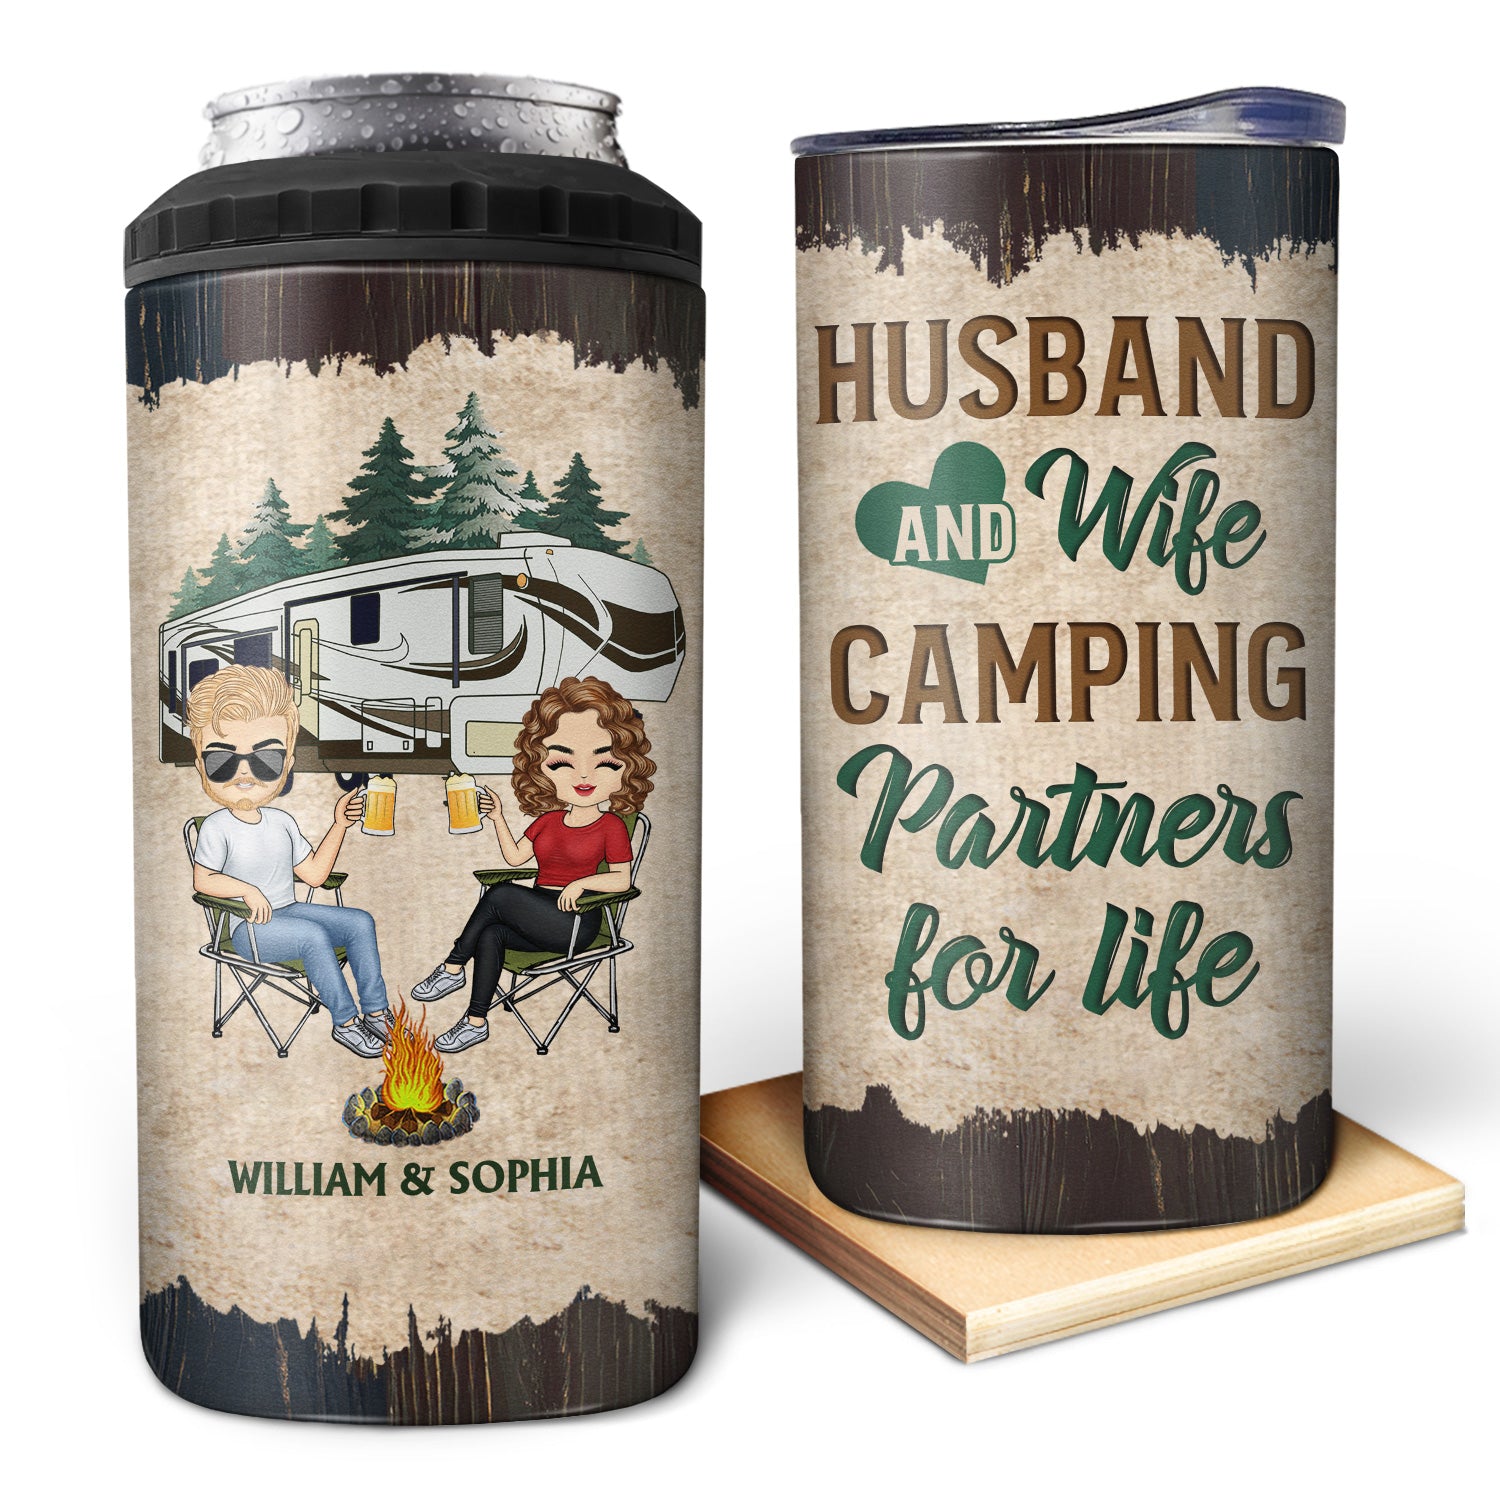 Husband And Wife Camping Partners For Life - Anniversary, Birthday Gift For Spouse, Husband, Wife, Boyfriend, Girlfriend, Campers - Personalized Custom 4 In 1 Can Cooler Tumbler